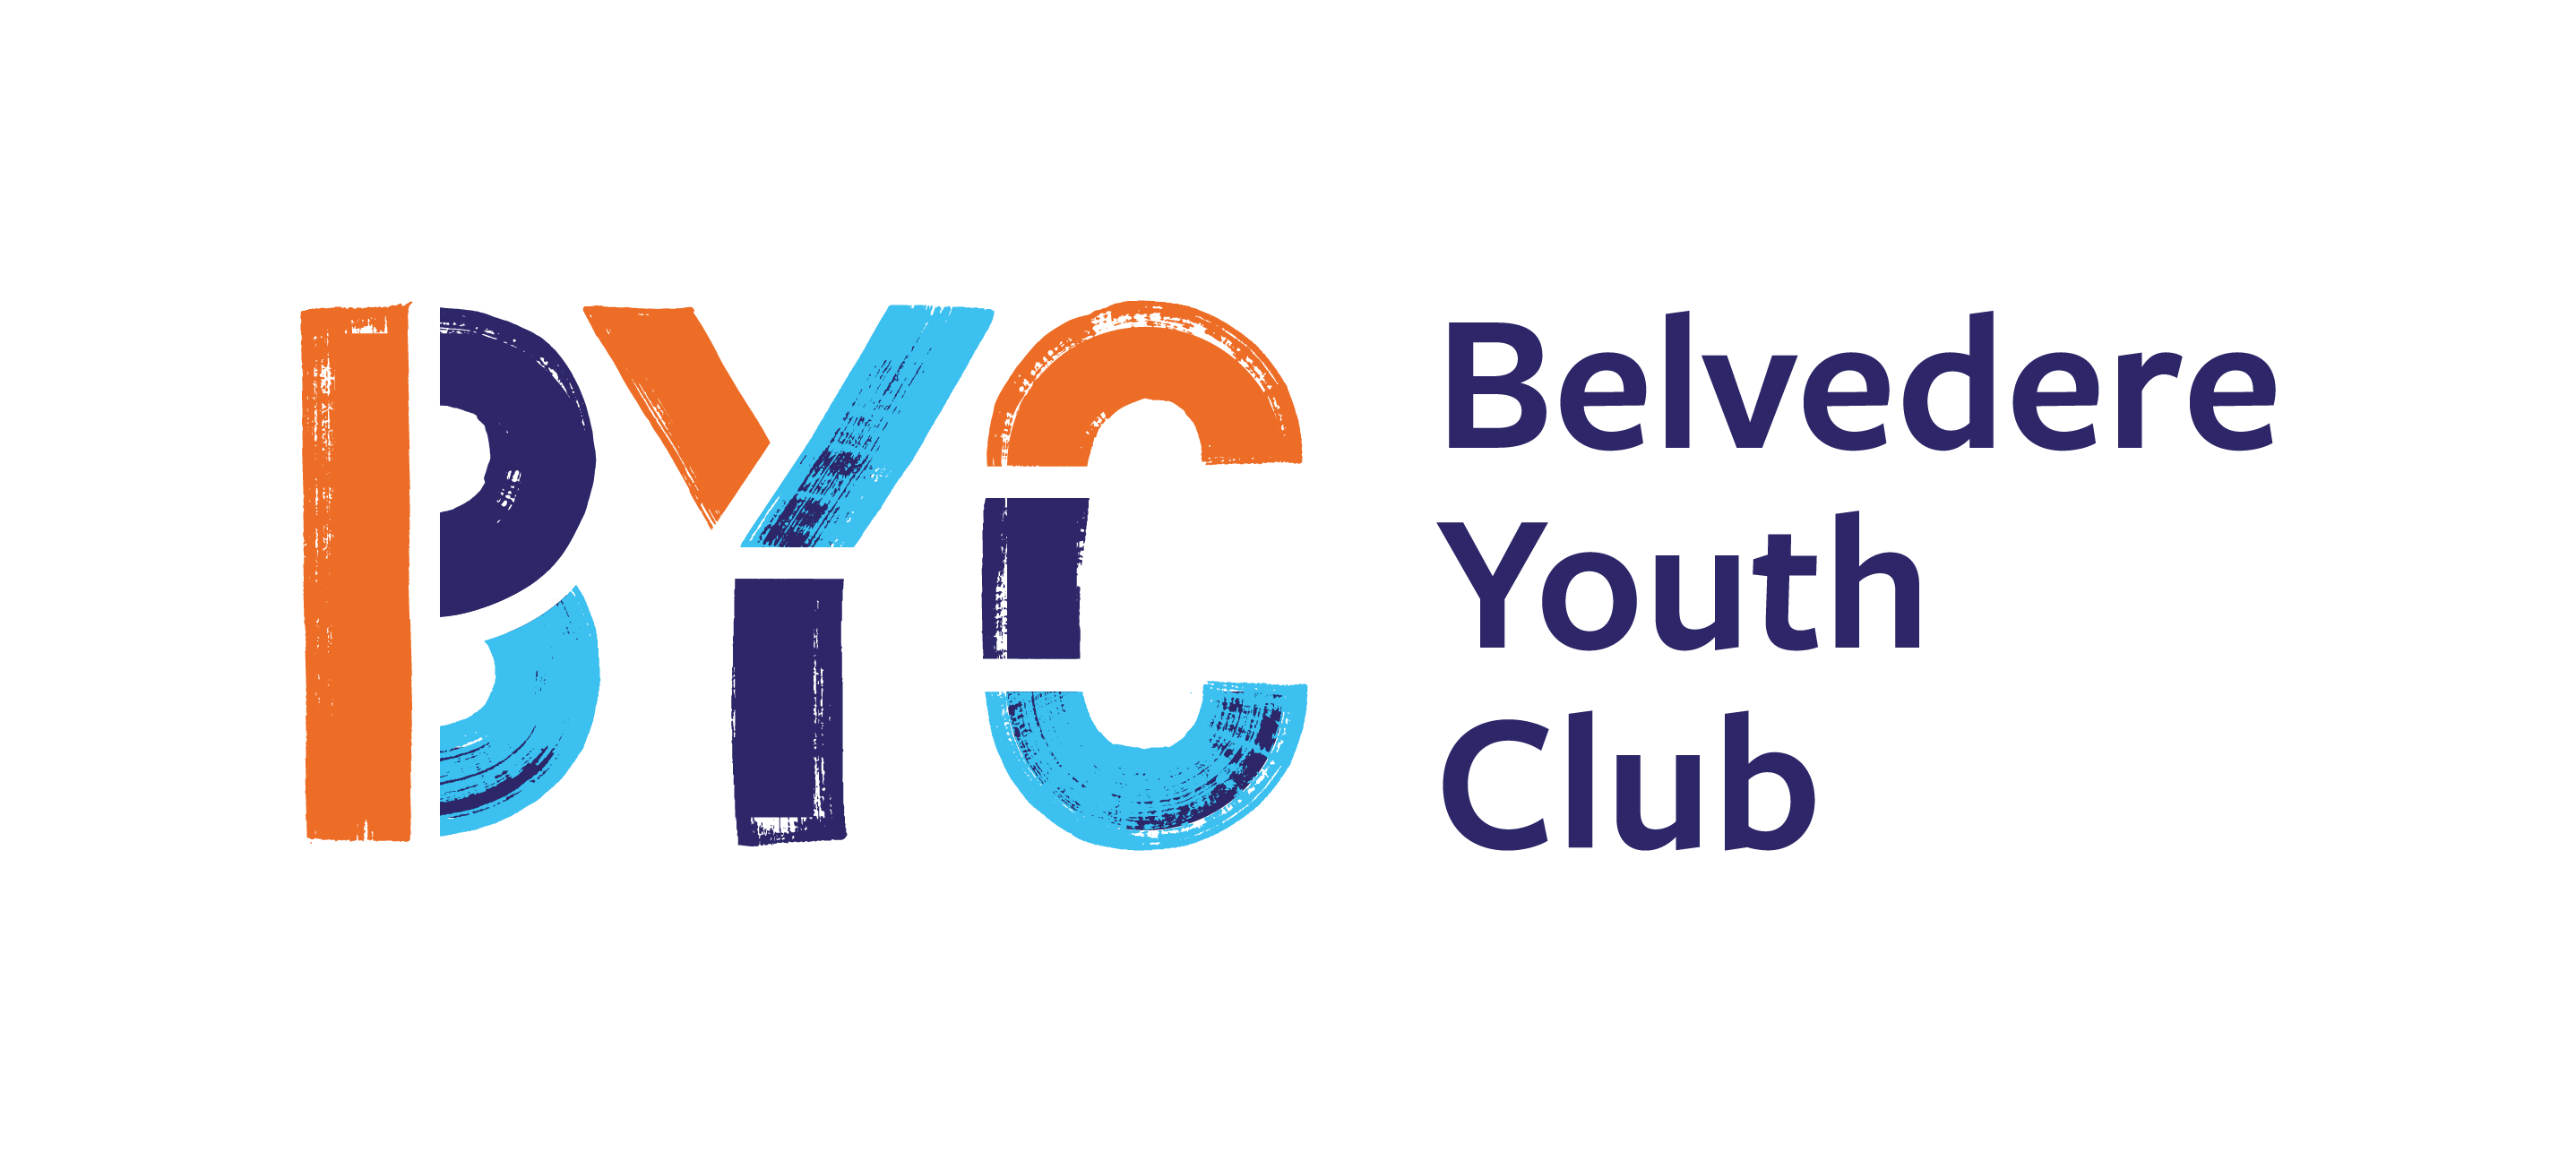 Belverdere Youth Club